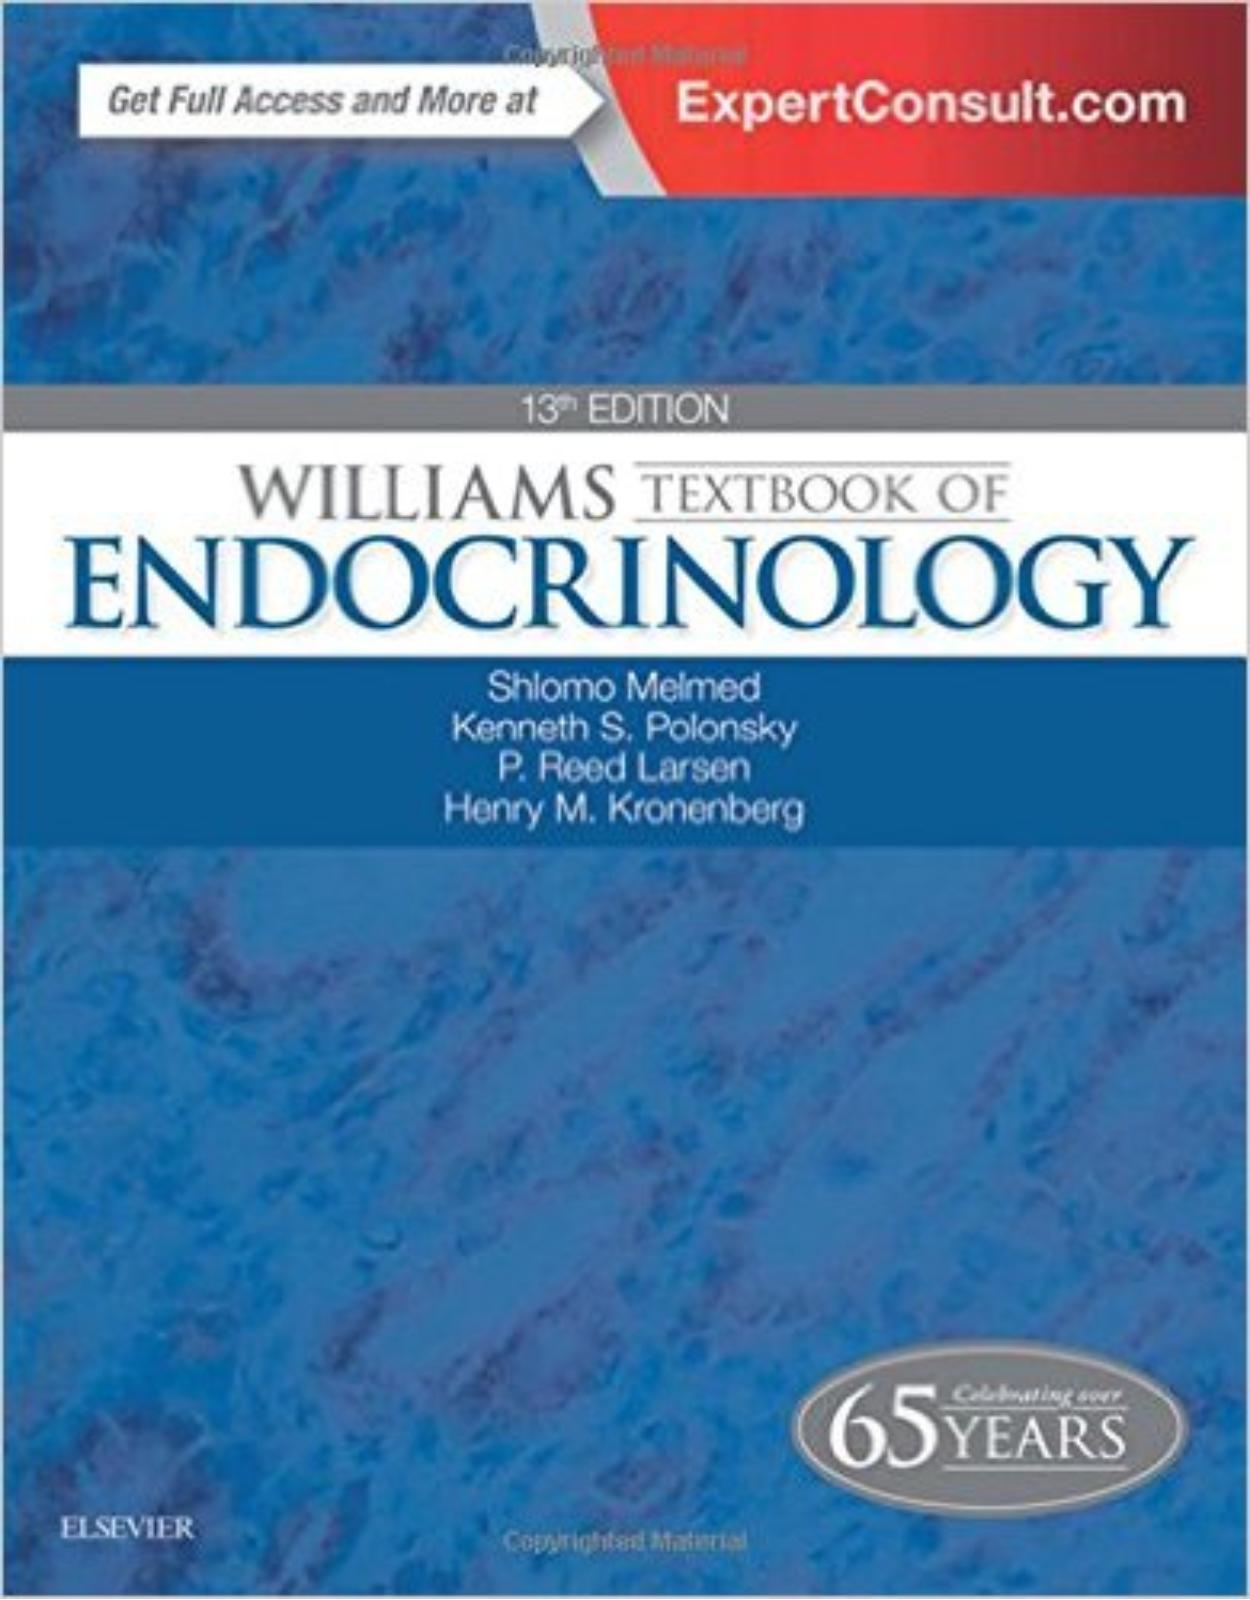 Williams Textbook of Endocrinology, 13e